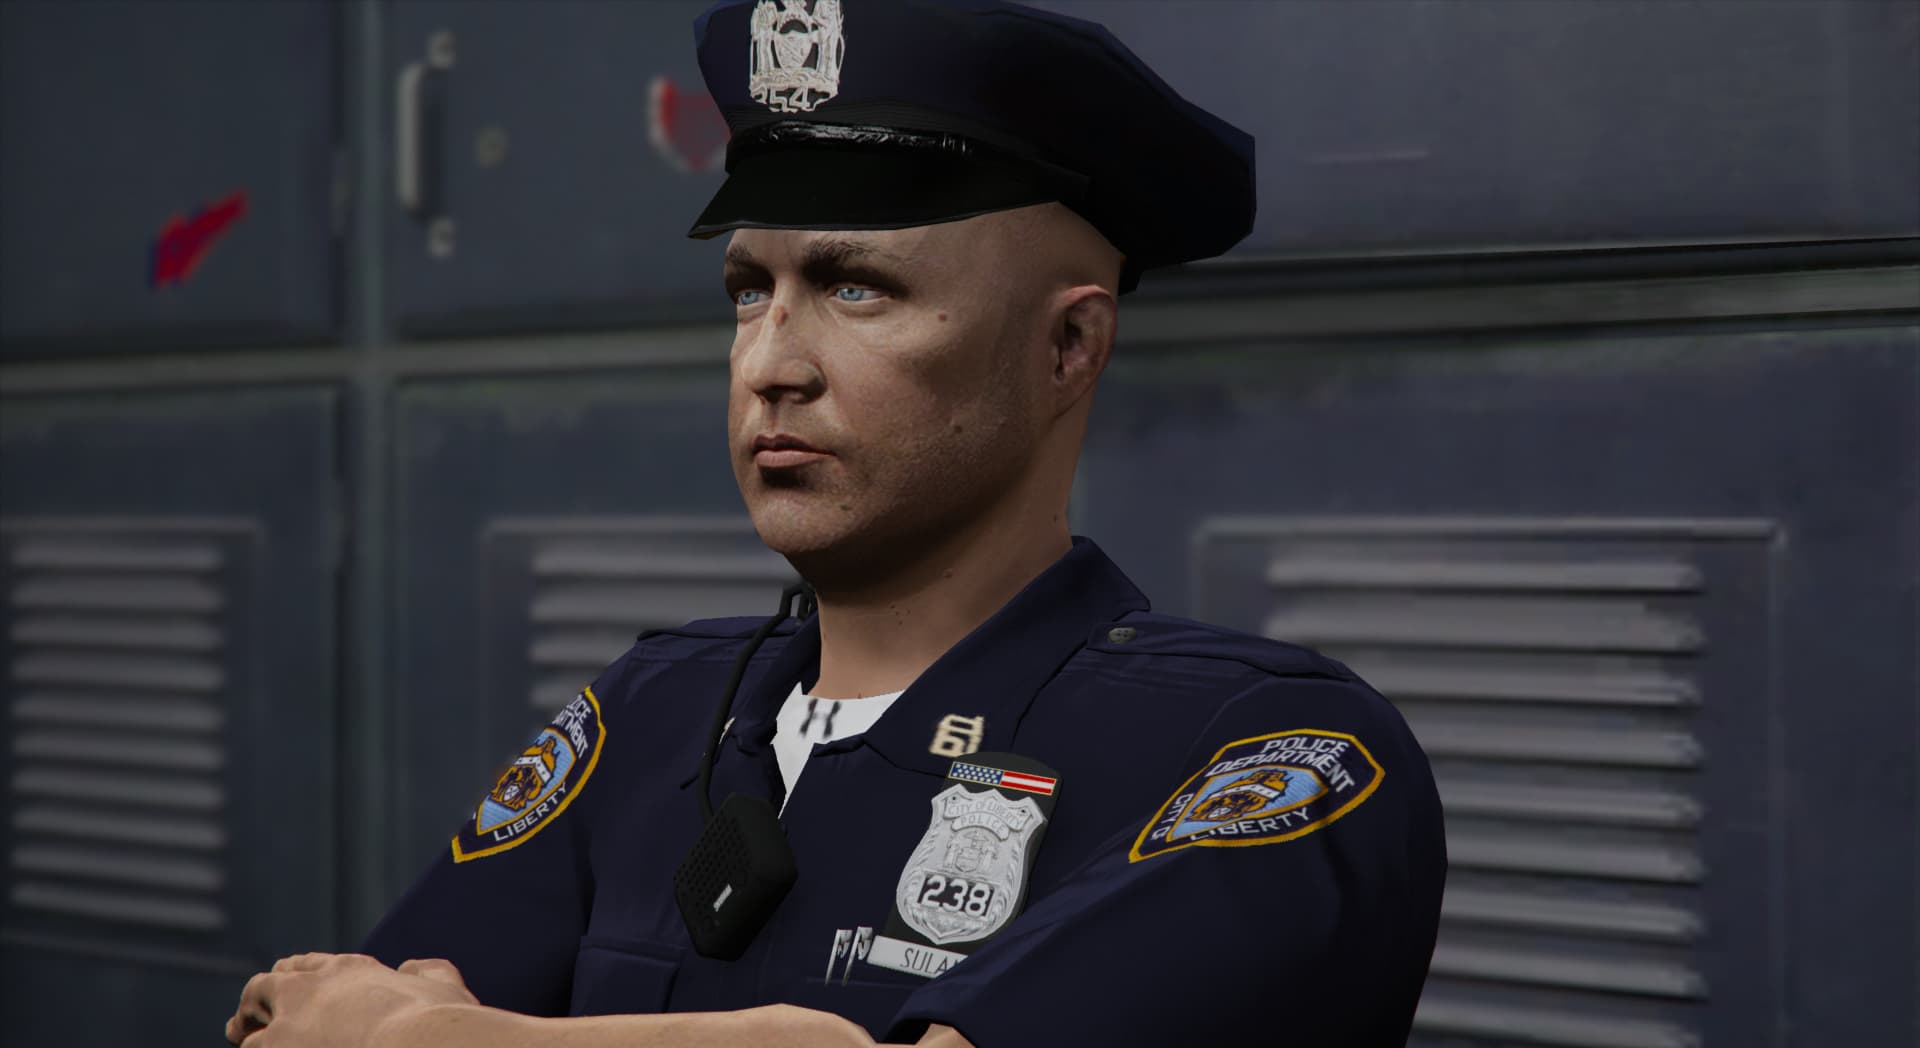 LCPD Big Badge Pack (NYPD Based) - Releases - Cfx.re Community